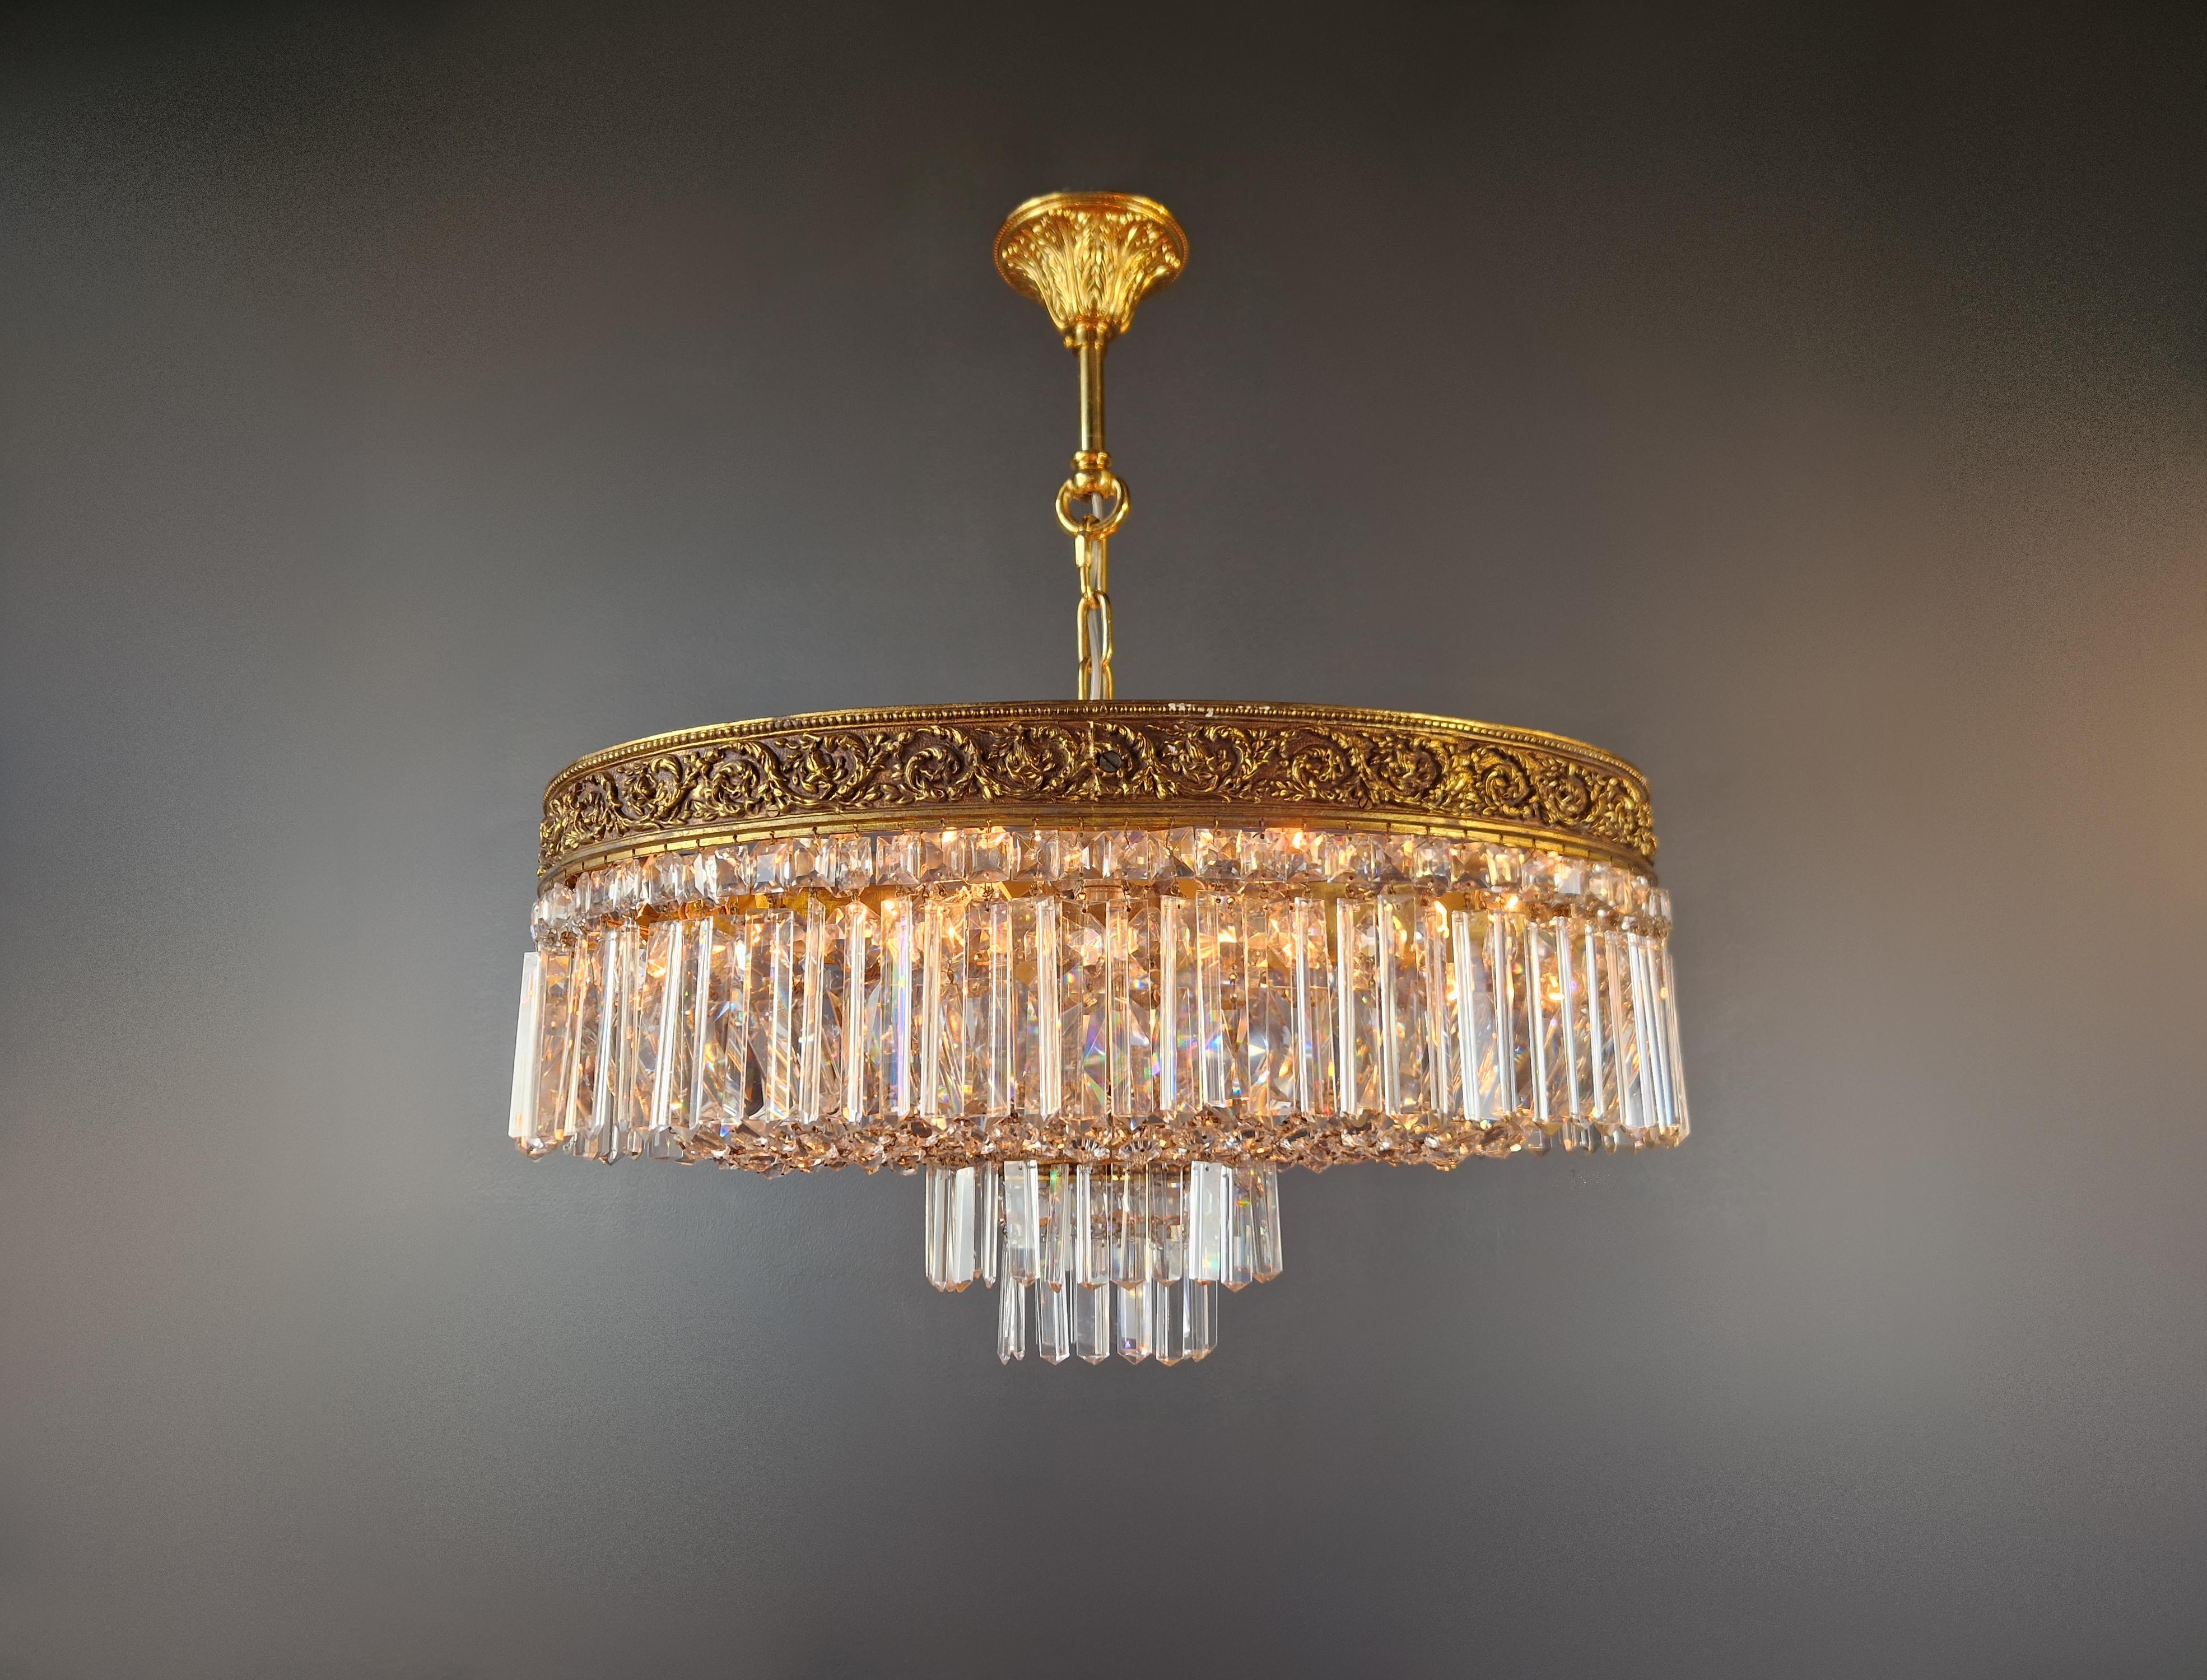 Exquisite Antique Chandelier: A restored masterpiece from the past

Discover the charm of a bygone era with our carefully restored antique chandelier, a true labor of love from Berlin. Meticulously tailored to U.S. electrical standards, this piece